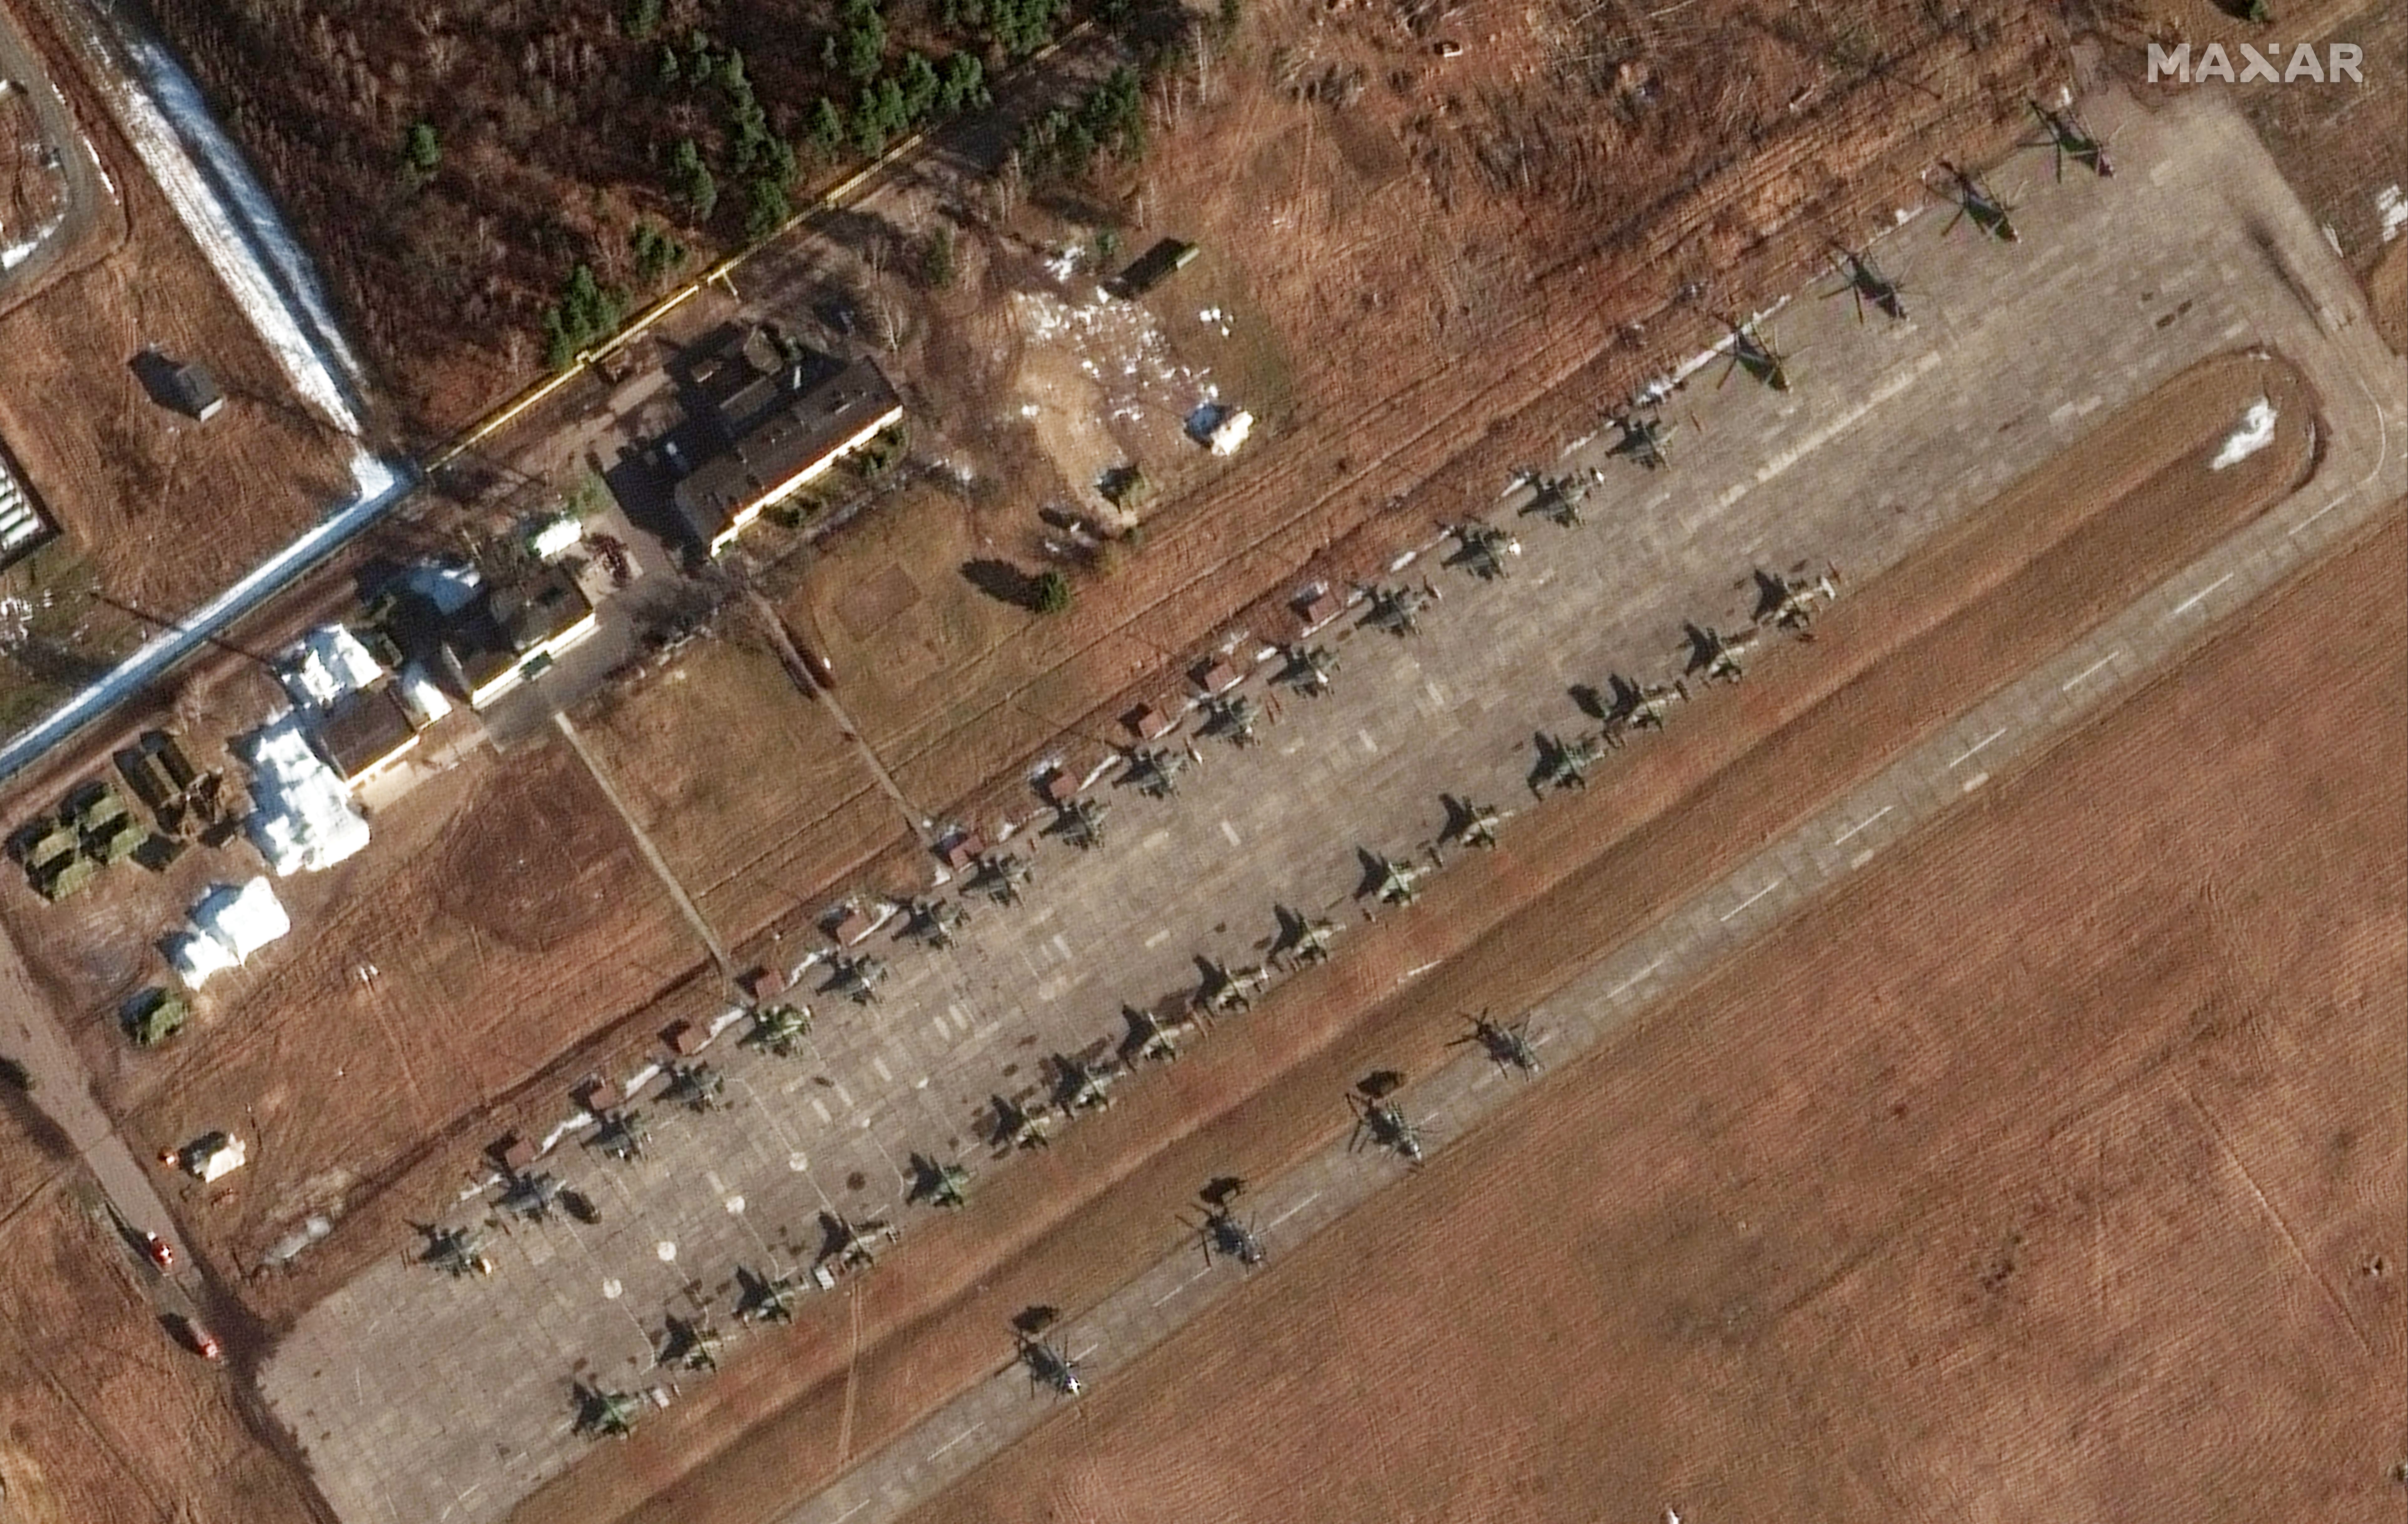 Ground attack aircraft at Luninets Air Base in Belarus, as seen on Feb. 14, 2022.